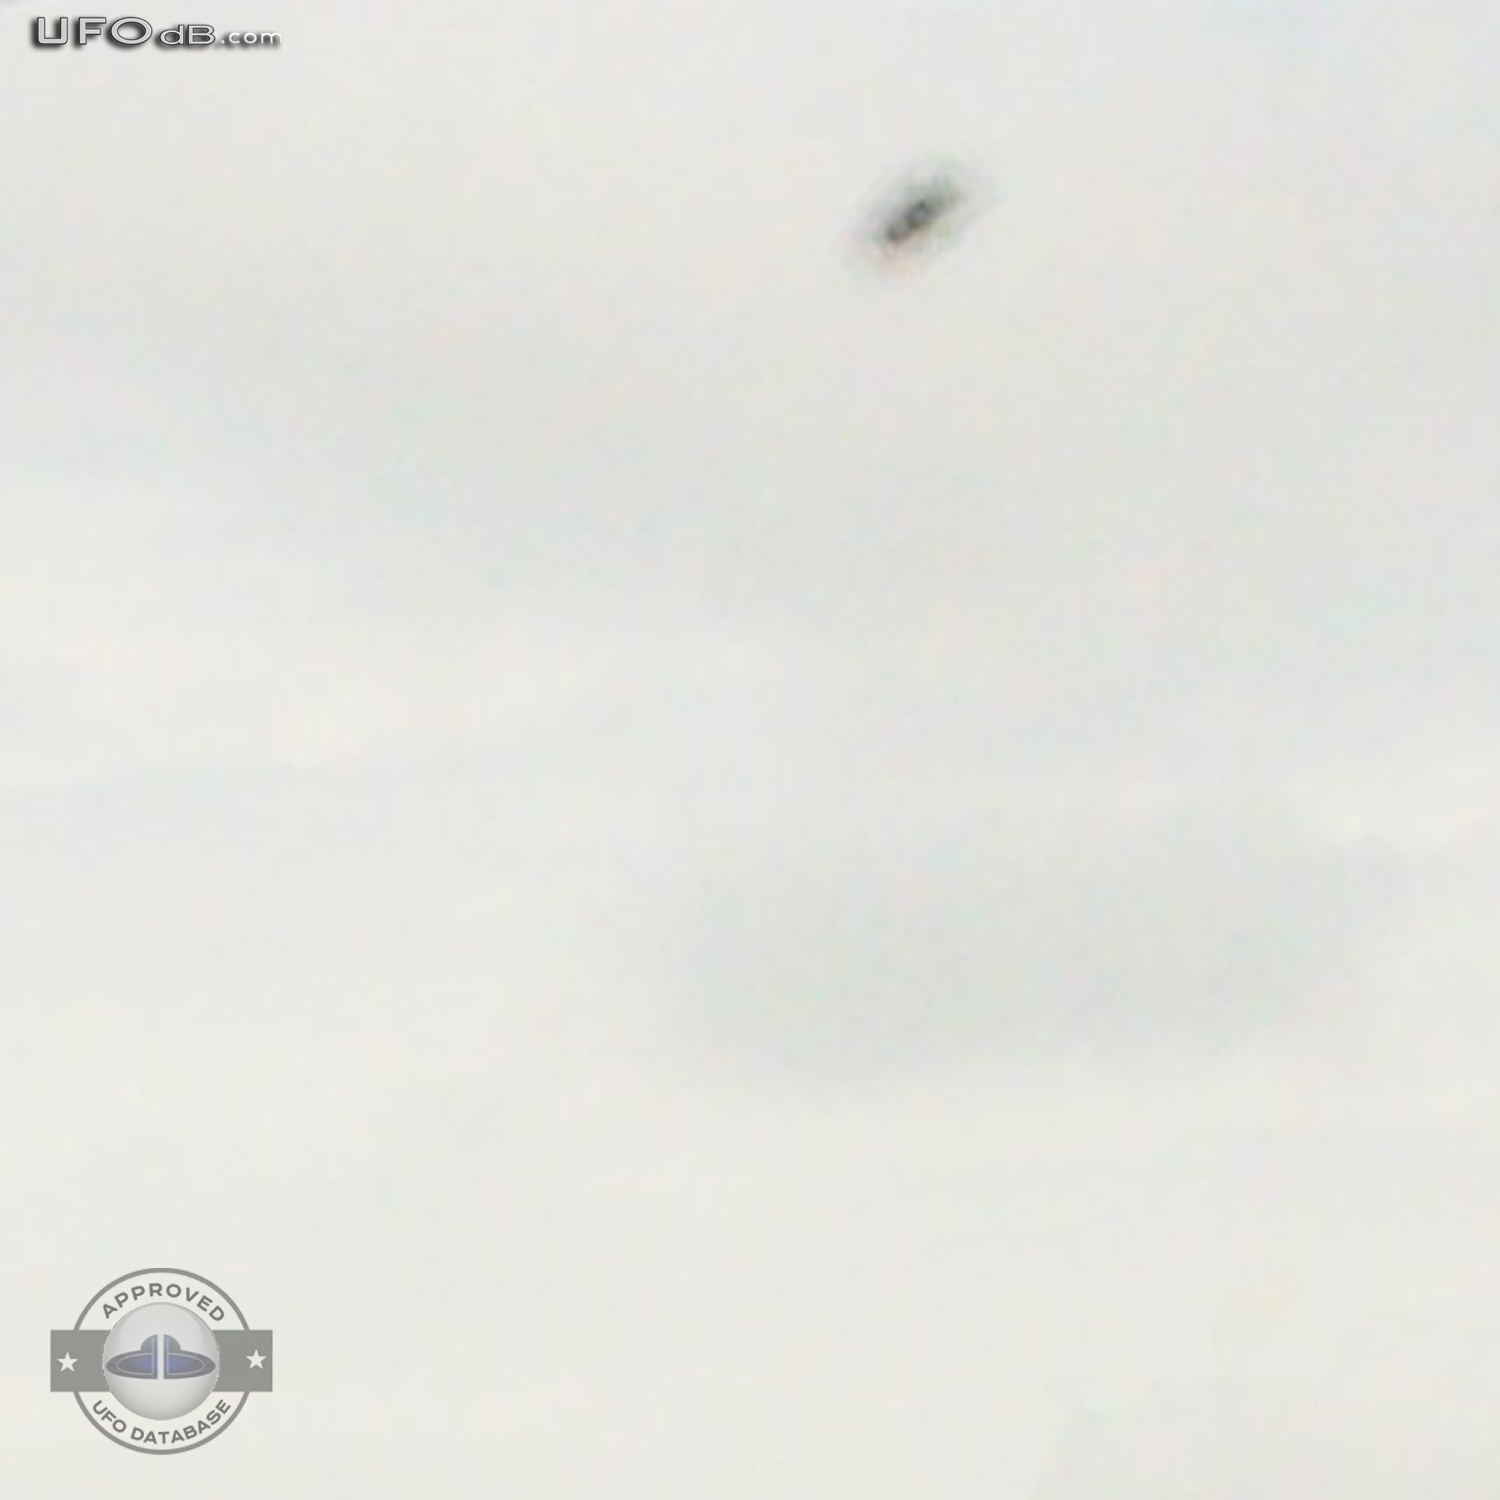 While looking at planes a Man see a UFO - Cauca, Colombia - March 2011 UFO Picture #280-3